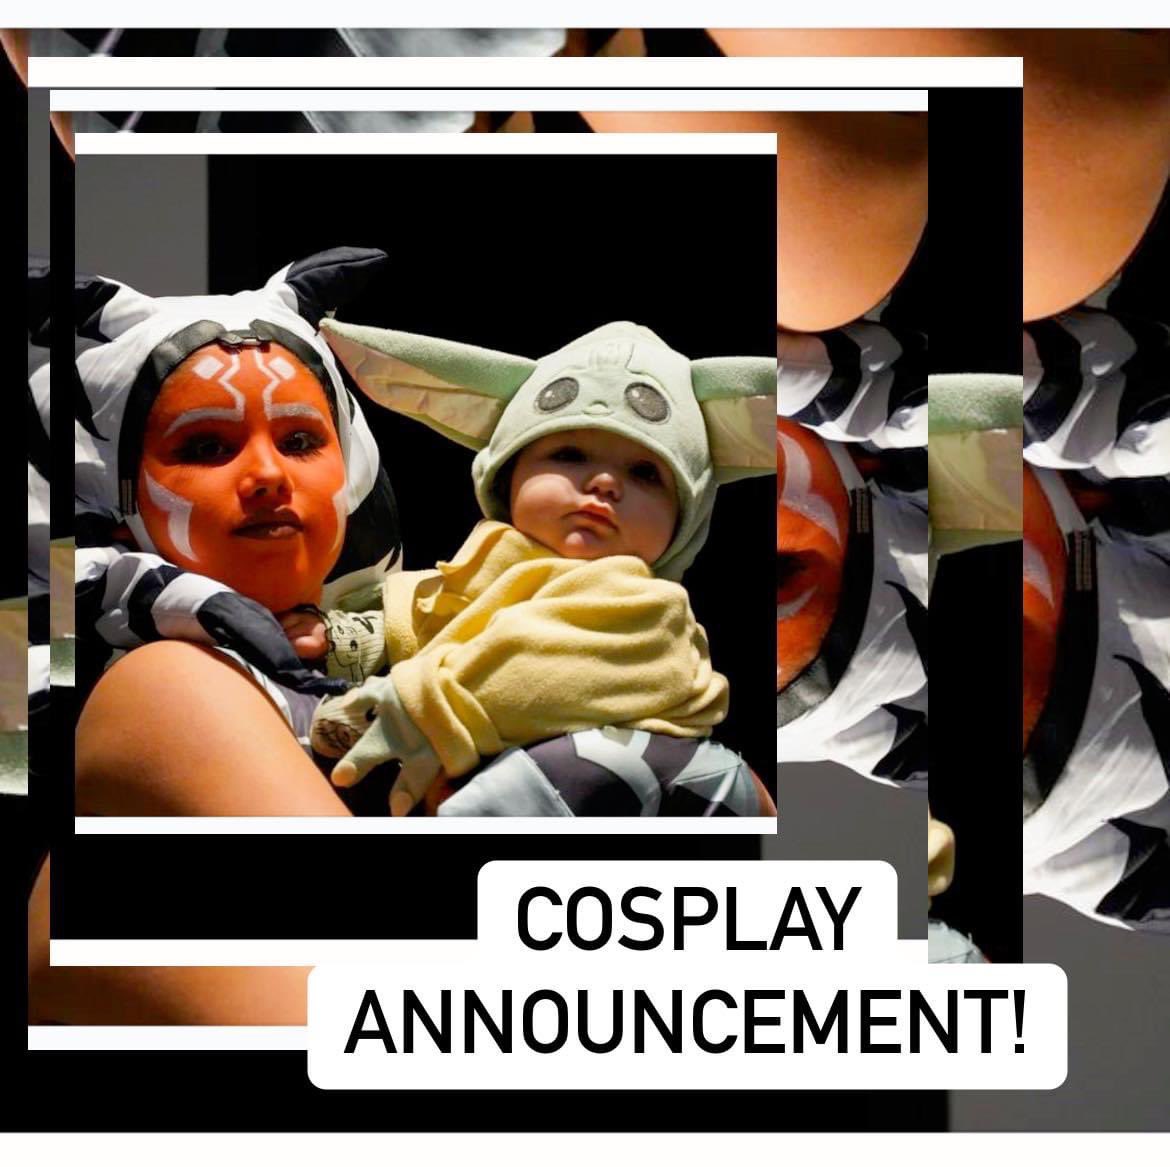 ATTENTION EVERYONE! TAKE NOTE! 
The #IndigiPopX COSPLAY CONTEST start has been bumped to 2 pm in the 5 Moons Theater! We’ll see all you cosplayers then!  #CosplayEveryDay #IPX2024 #FamilyDay